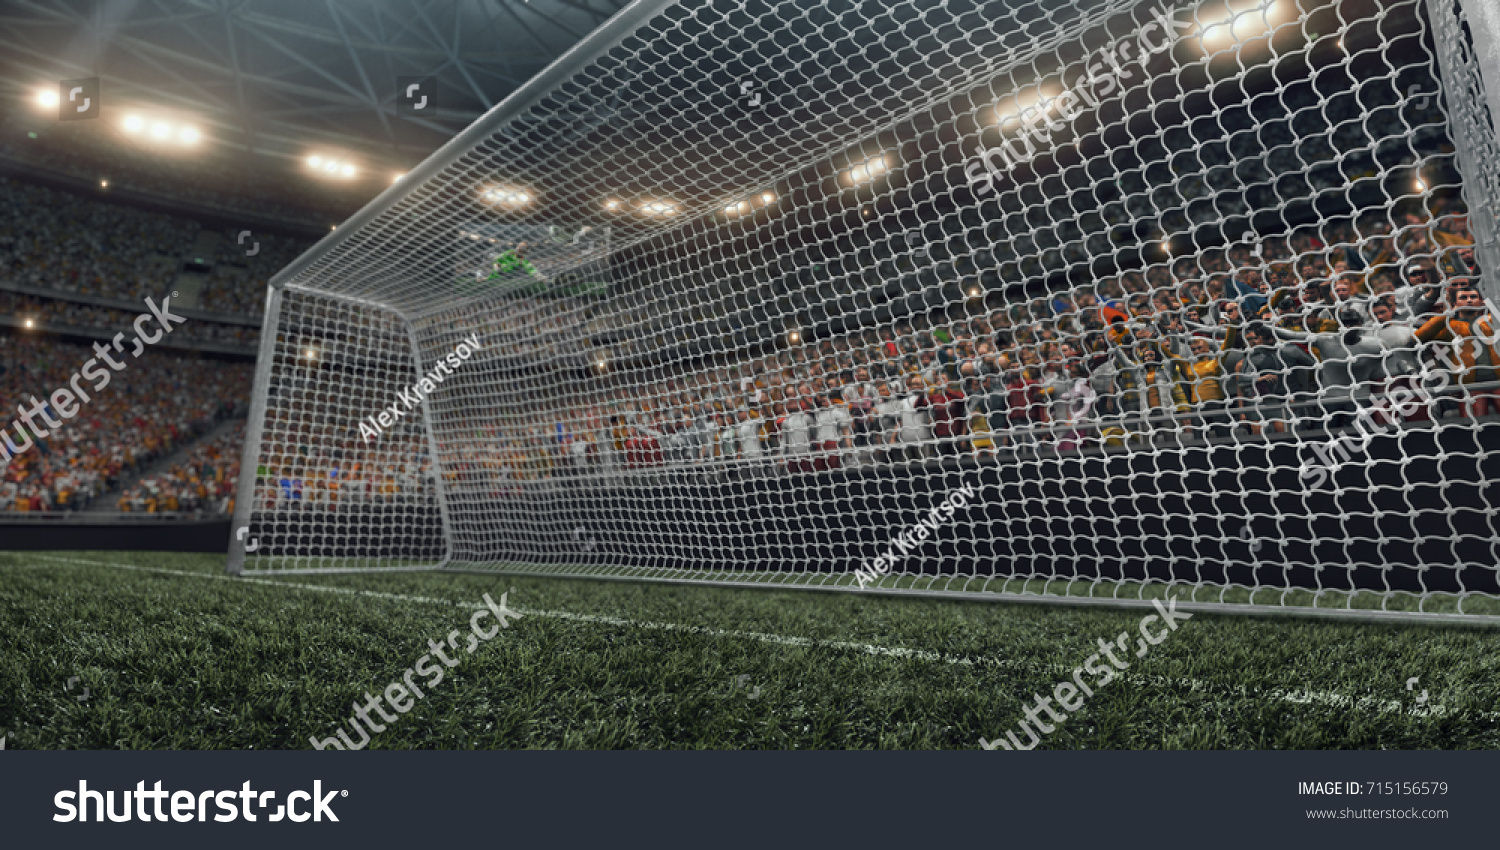 Dramatic soccer stadium with soccer gate in 3D. Professional arena are full of fans. #715156579